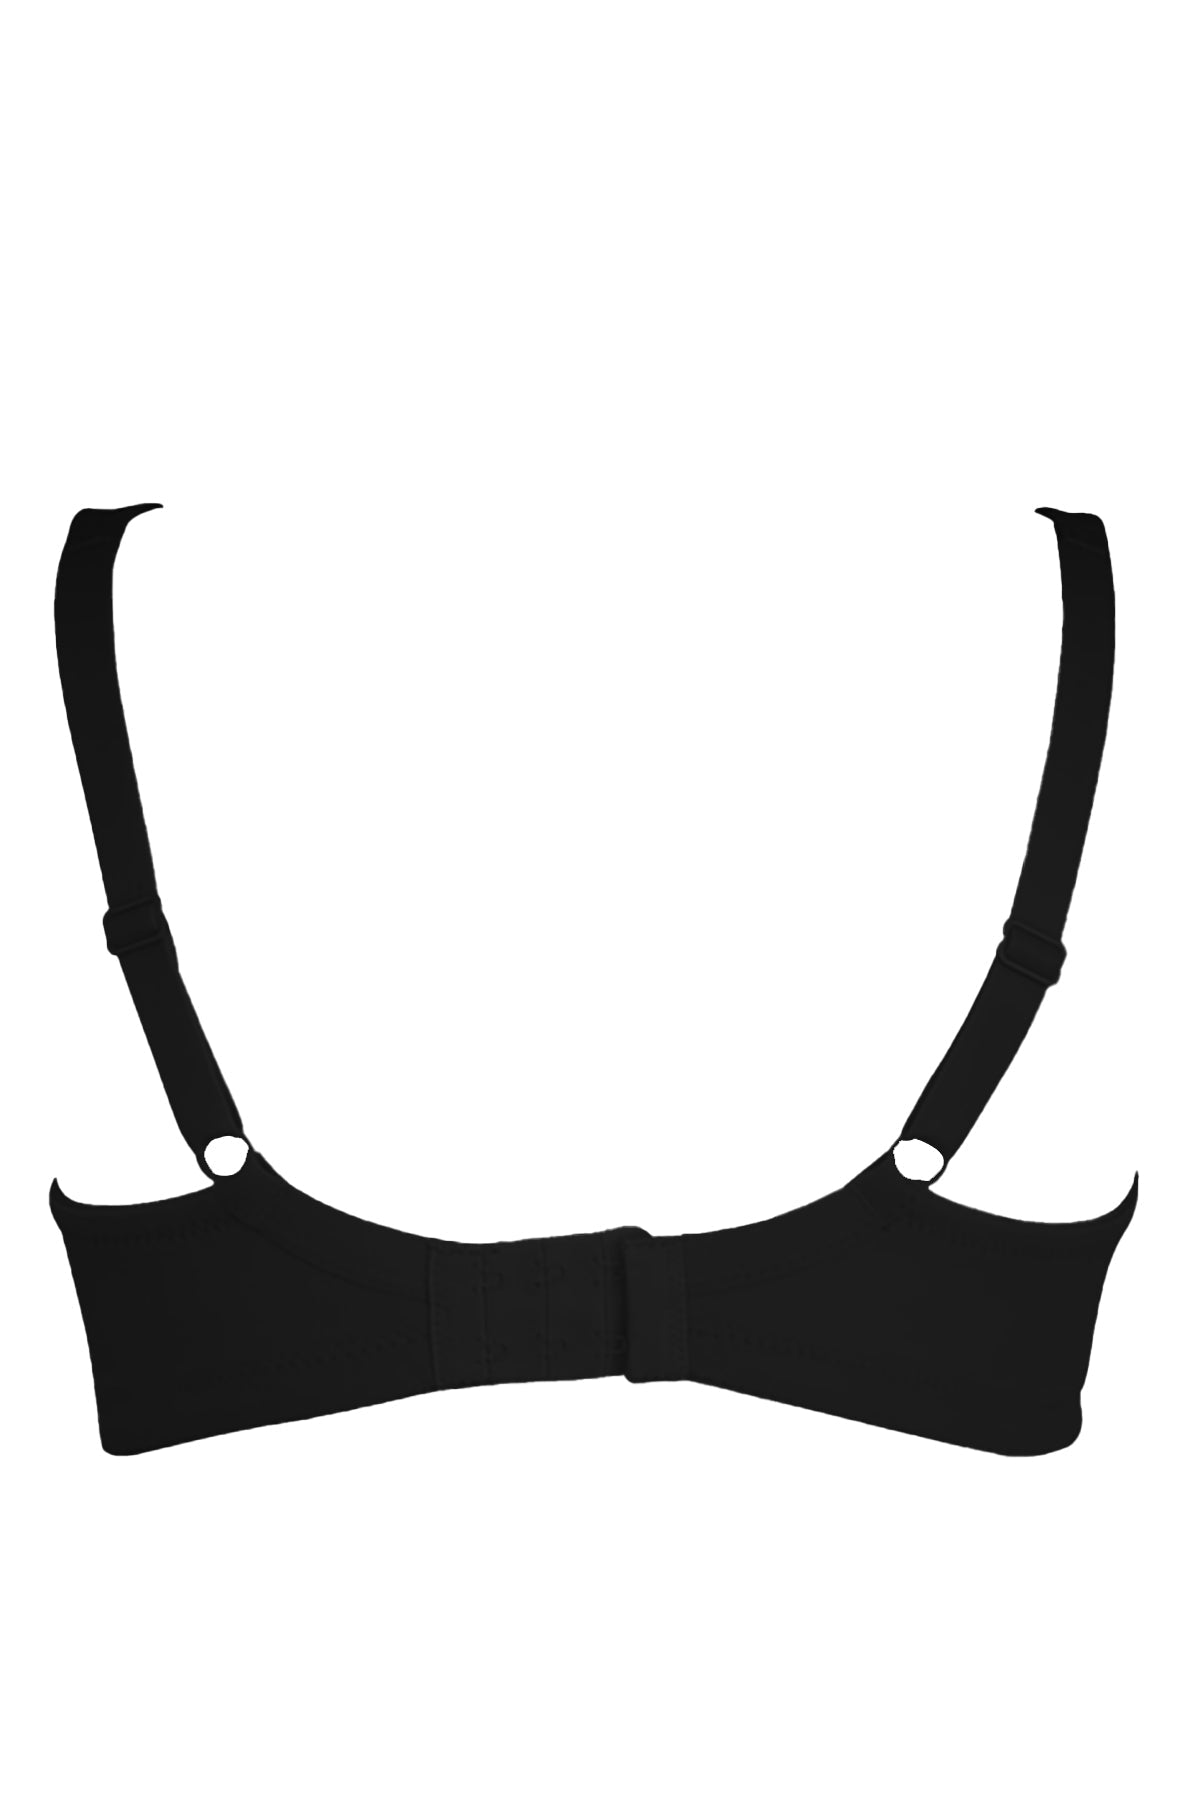 BLS - Colleen Stretchable Cotton Camisole - Black